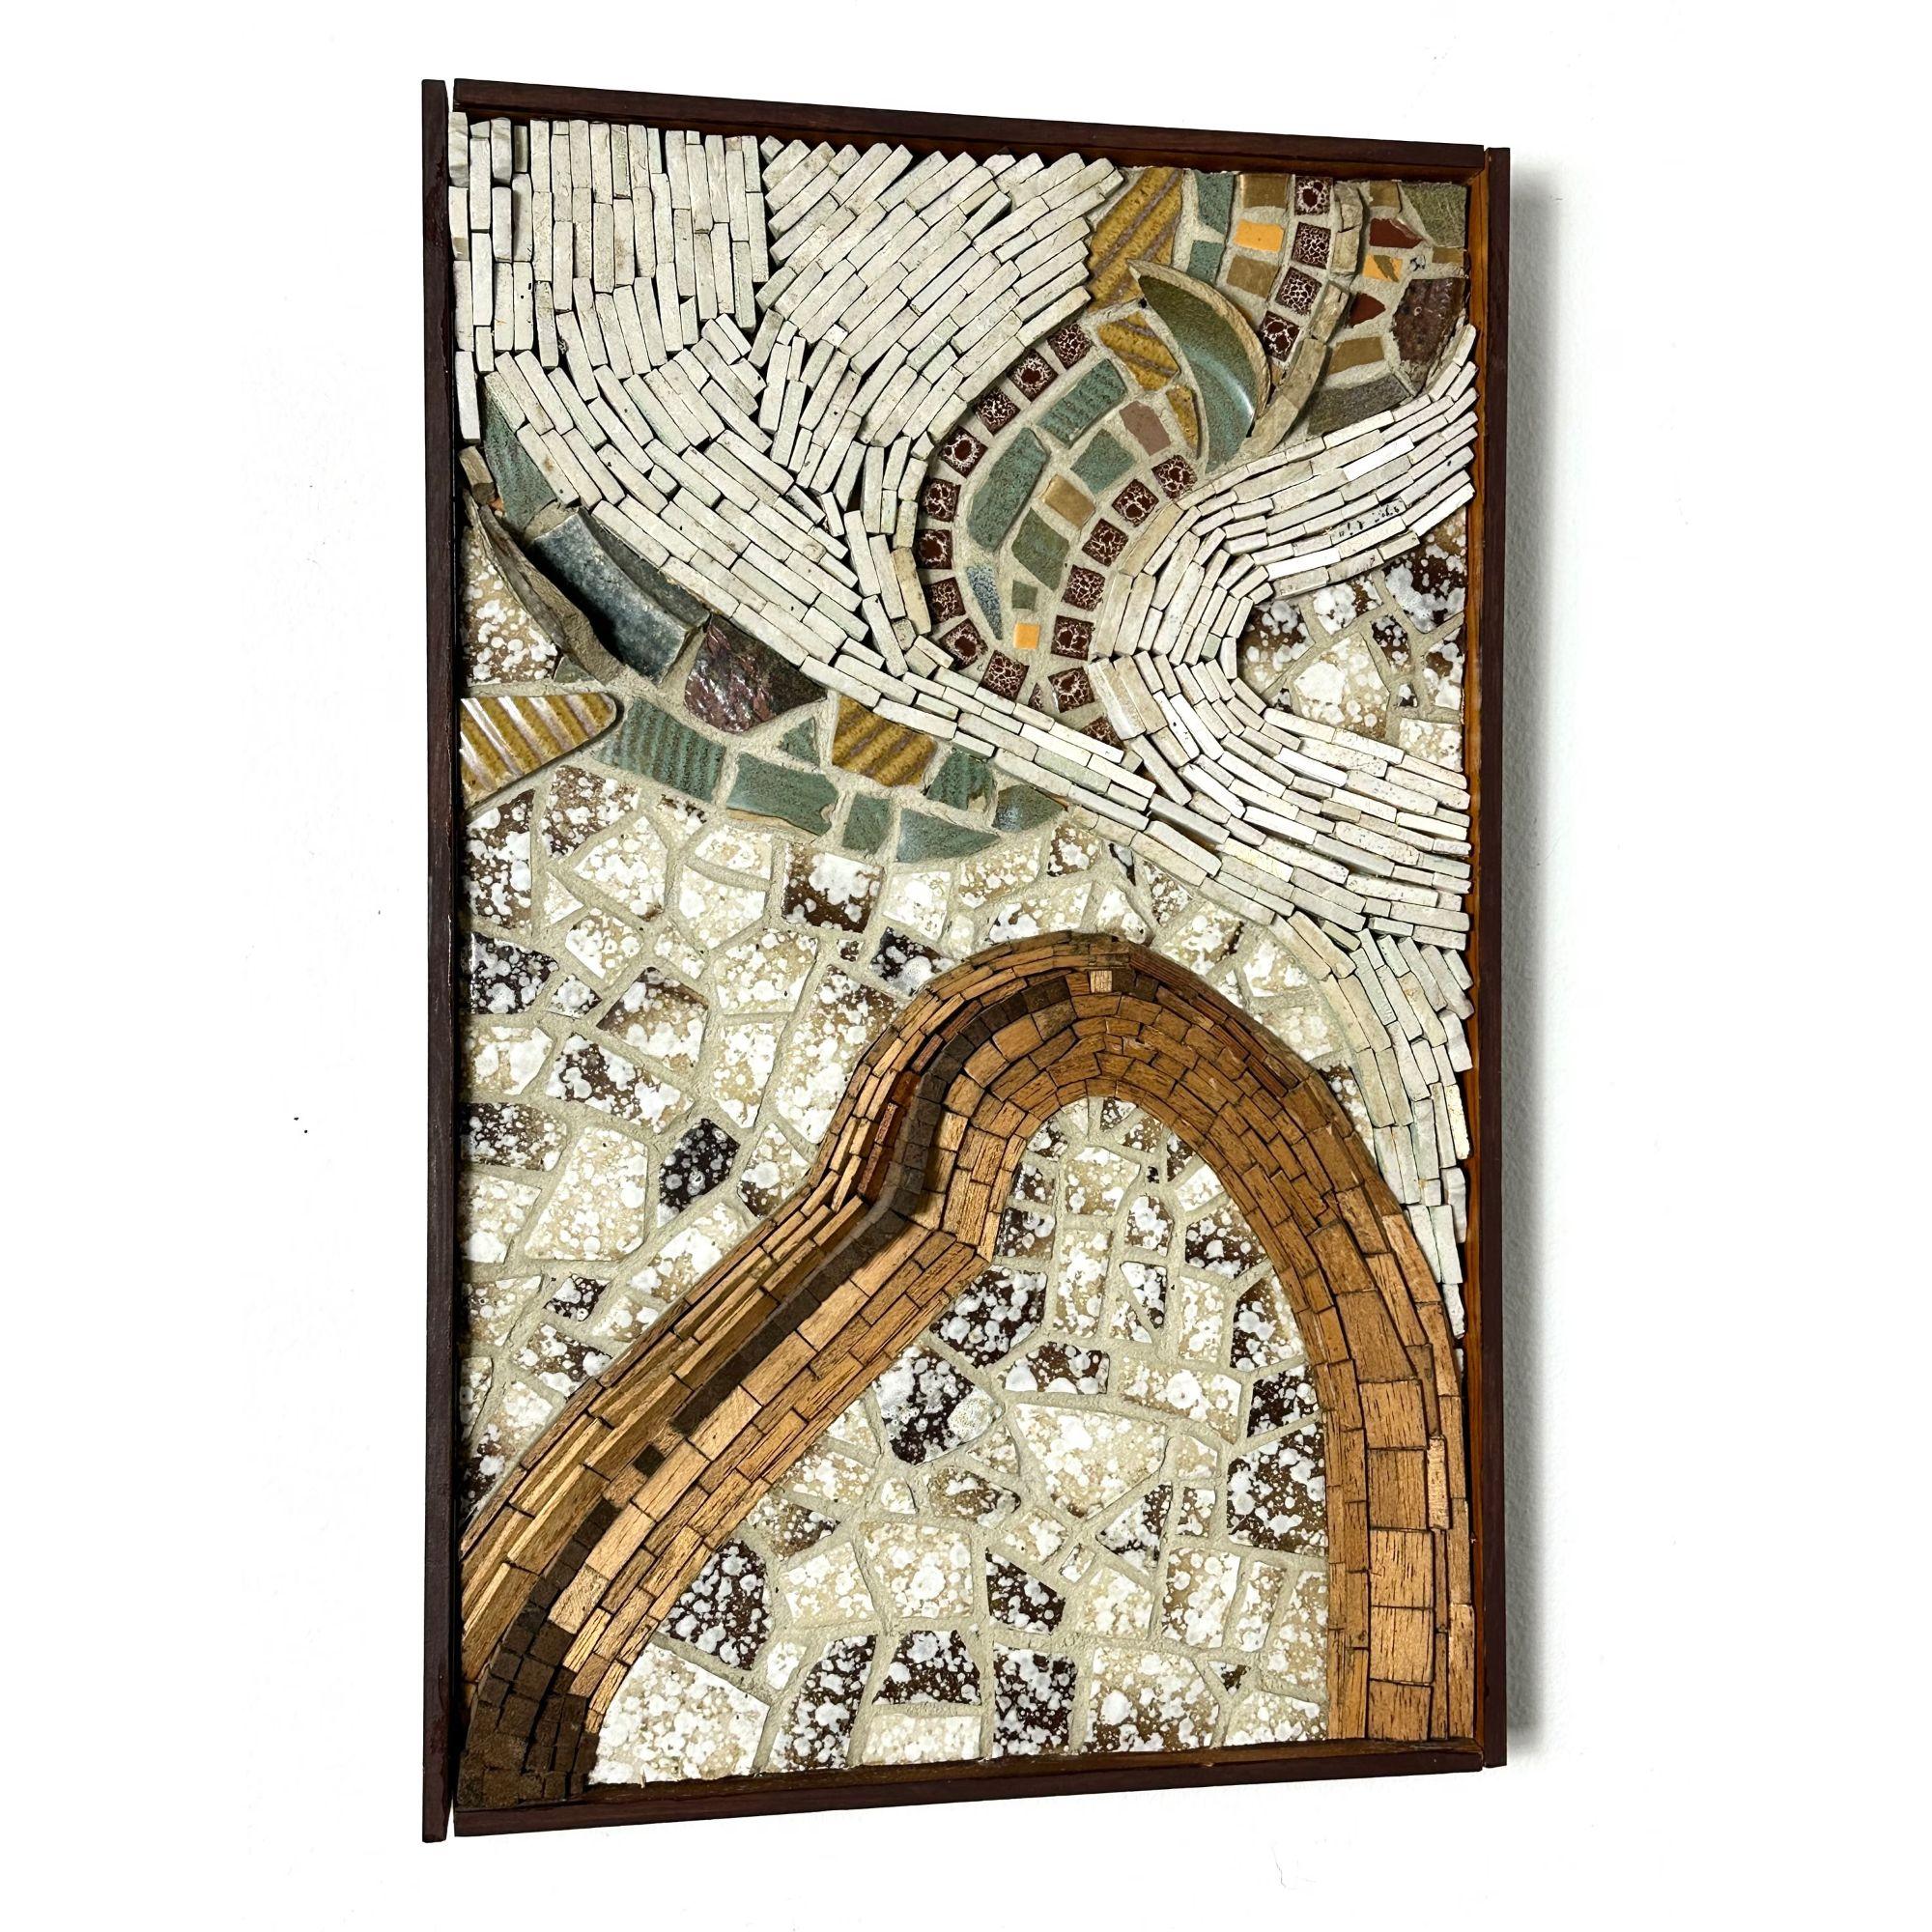 Orignal Vintage Mid Century Modern Ceramic Tile & Wood Mosaic Wall Sculpture by Fred Scott

Abstract mosaic wall sculpture by Ohio artist Fred Scott circa 1960s
Interesting composition of various tiles and wood in original framing
From the estate of